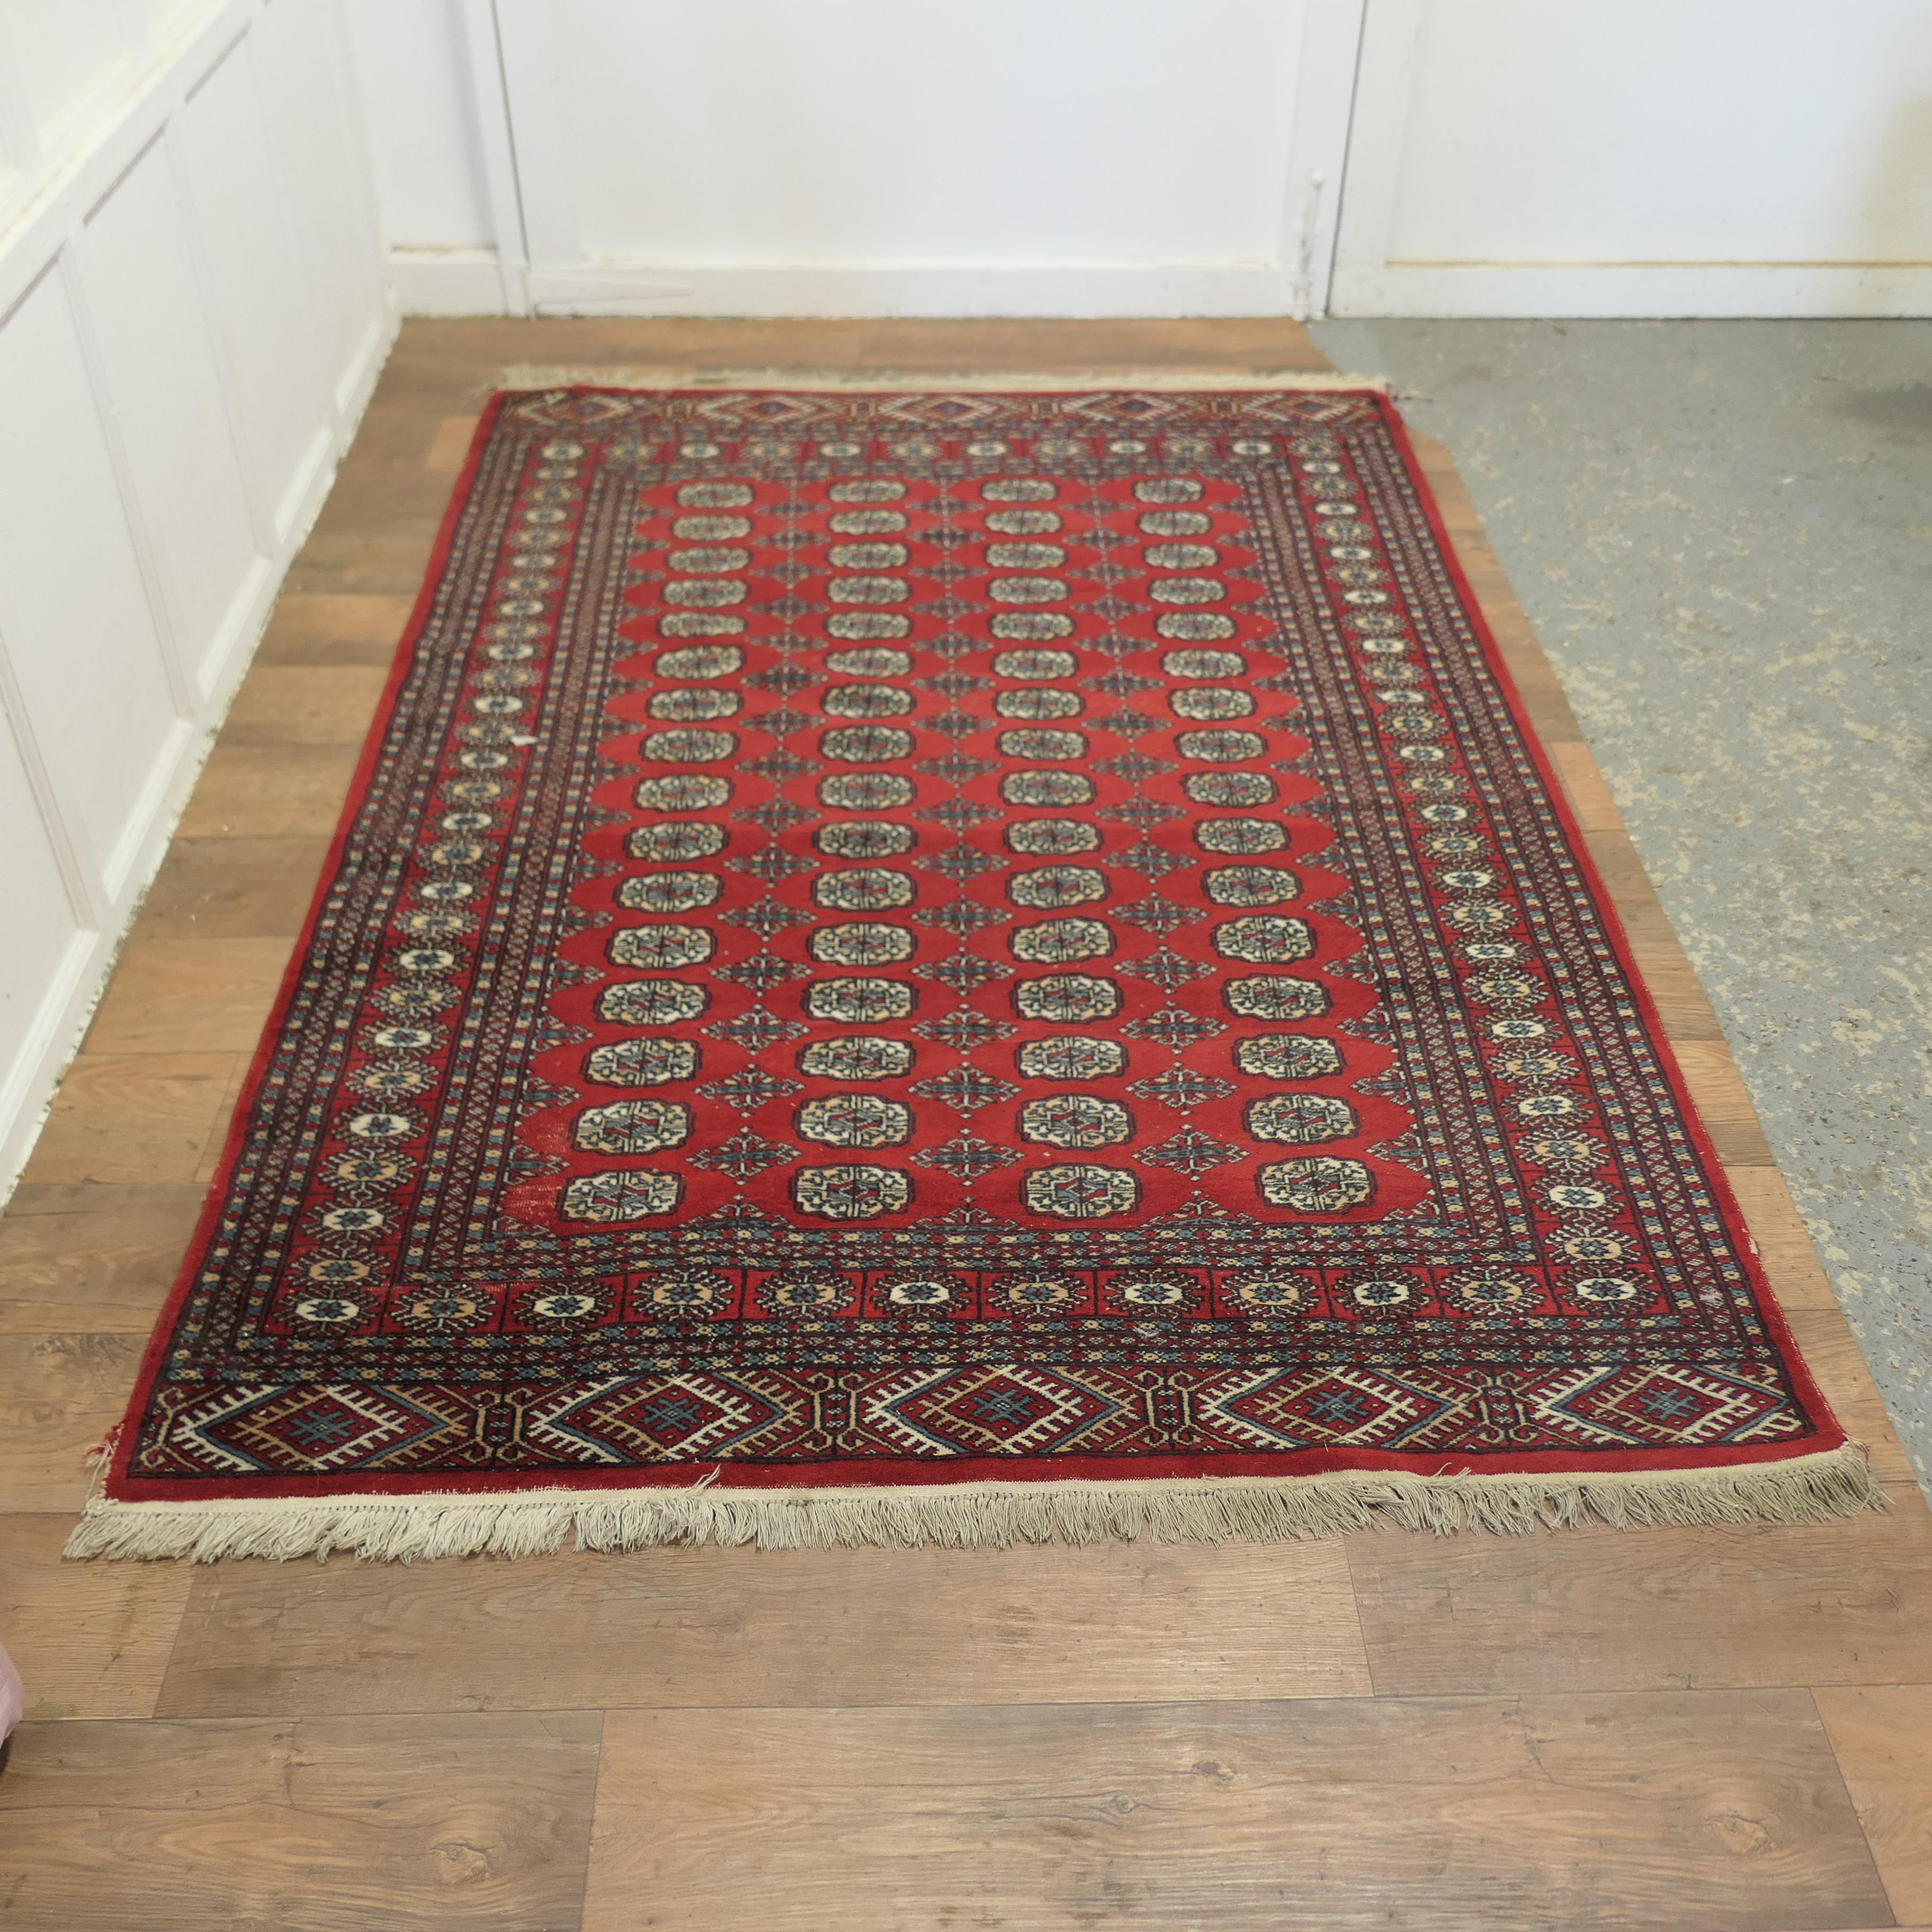 A Lovely Bright Red Wool Rug

The Carpet is a wonderful Bright colour with an attractive pattern and a wide border, there is little wear to the selvage edge at one end and a slightly bare patch at the other
This rug is from the middle of the 20th